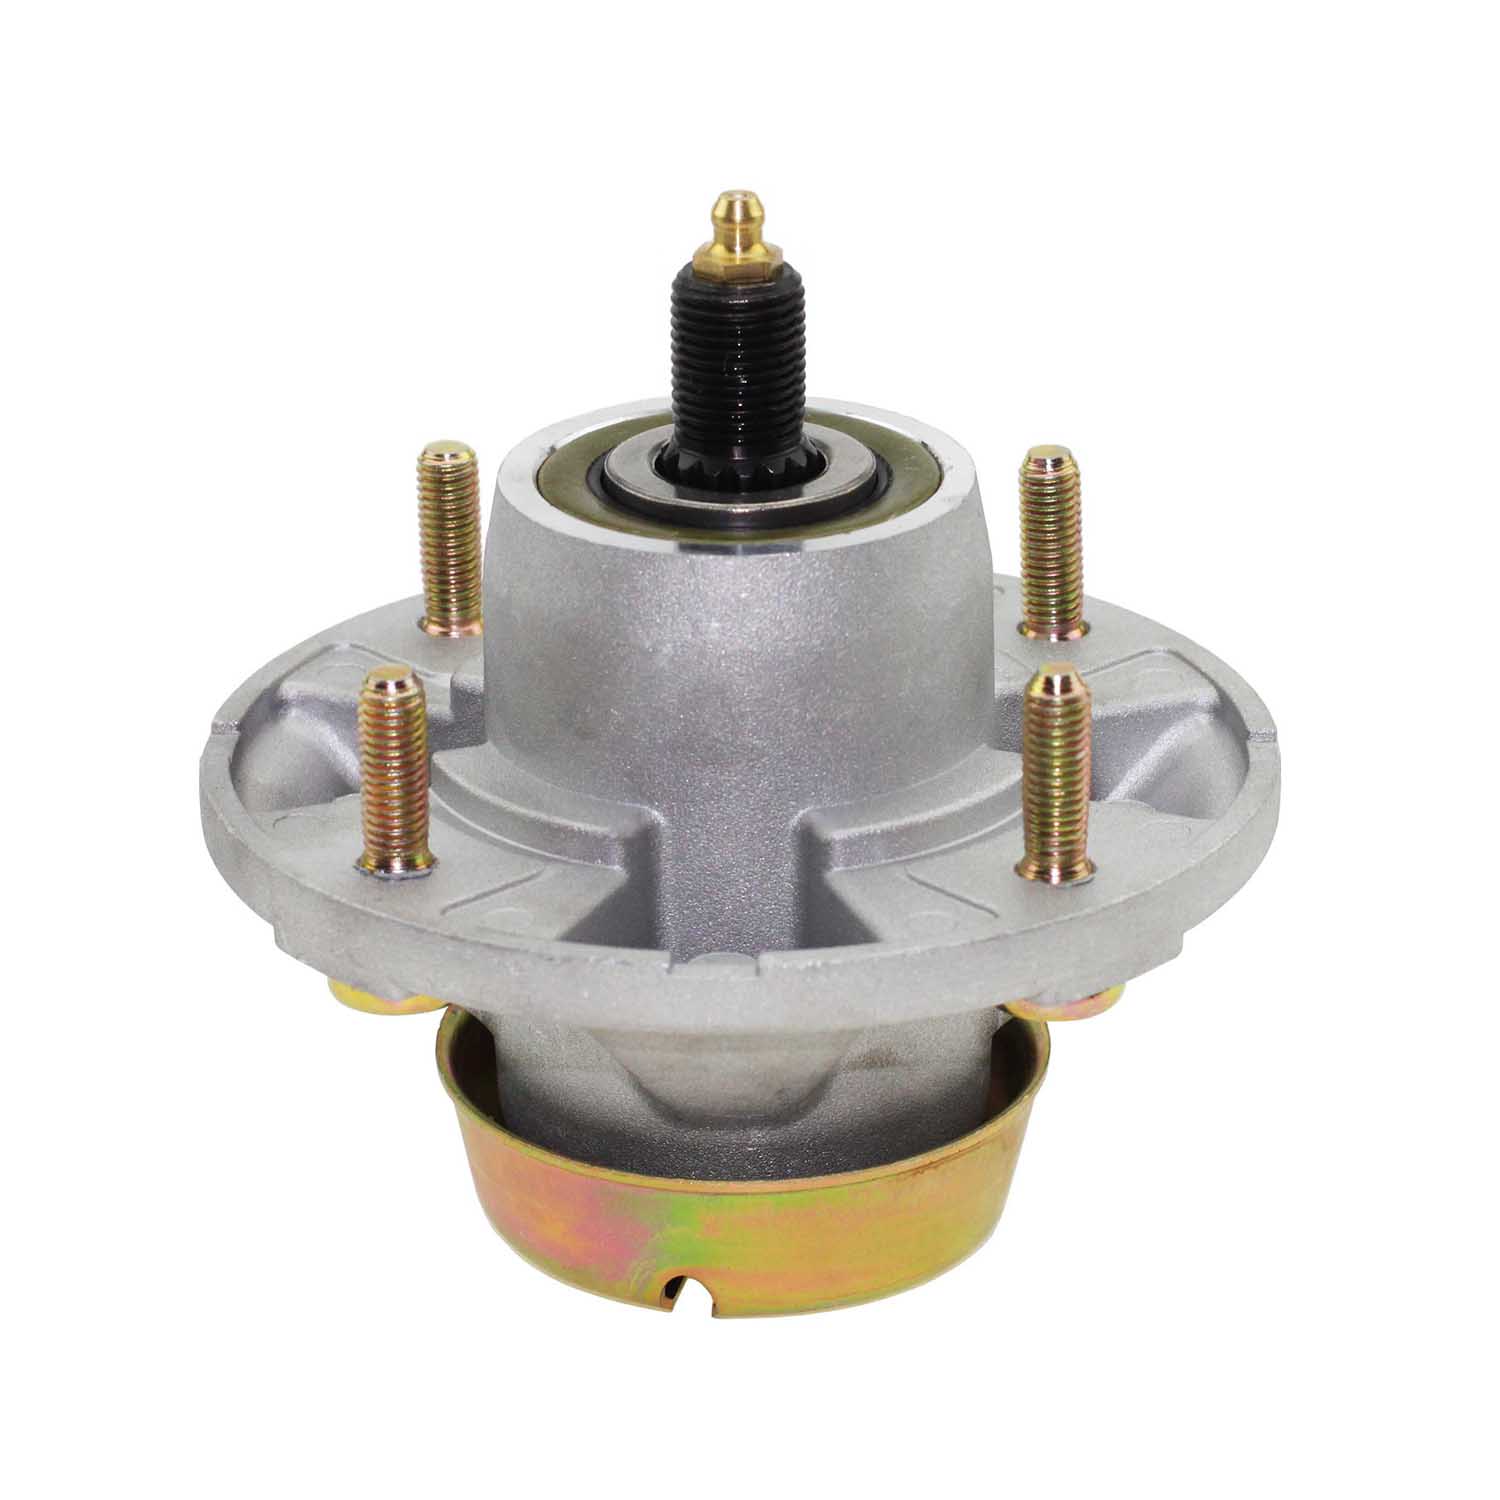 Spindle Assembly for John Deere AM144377, AM135349, AM124498, AM131680